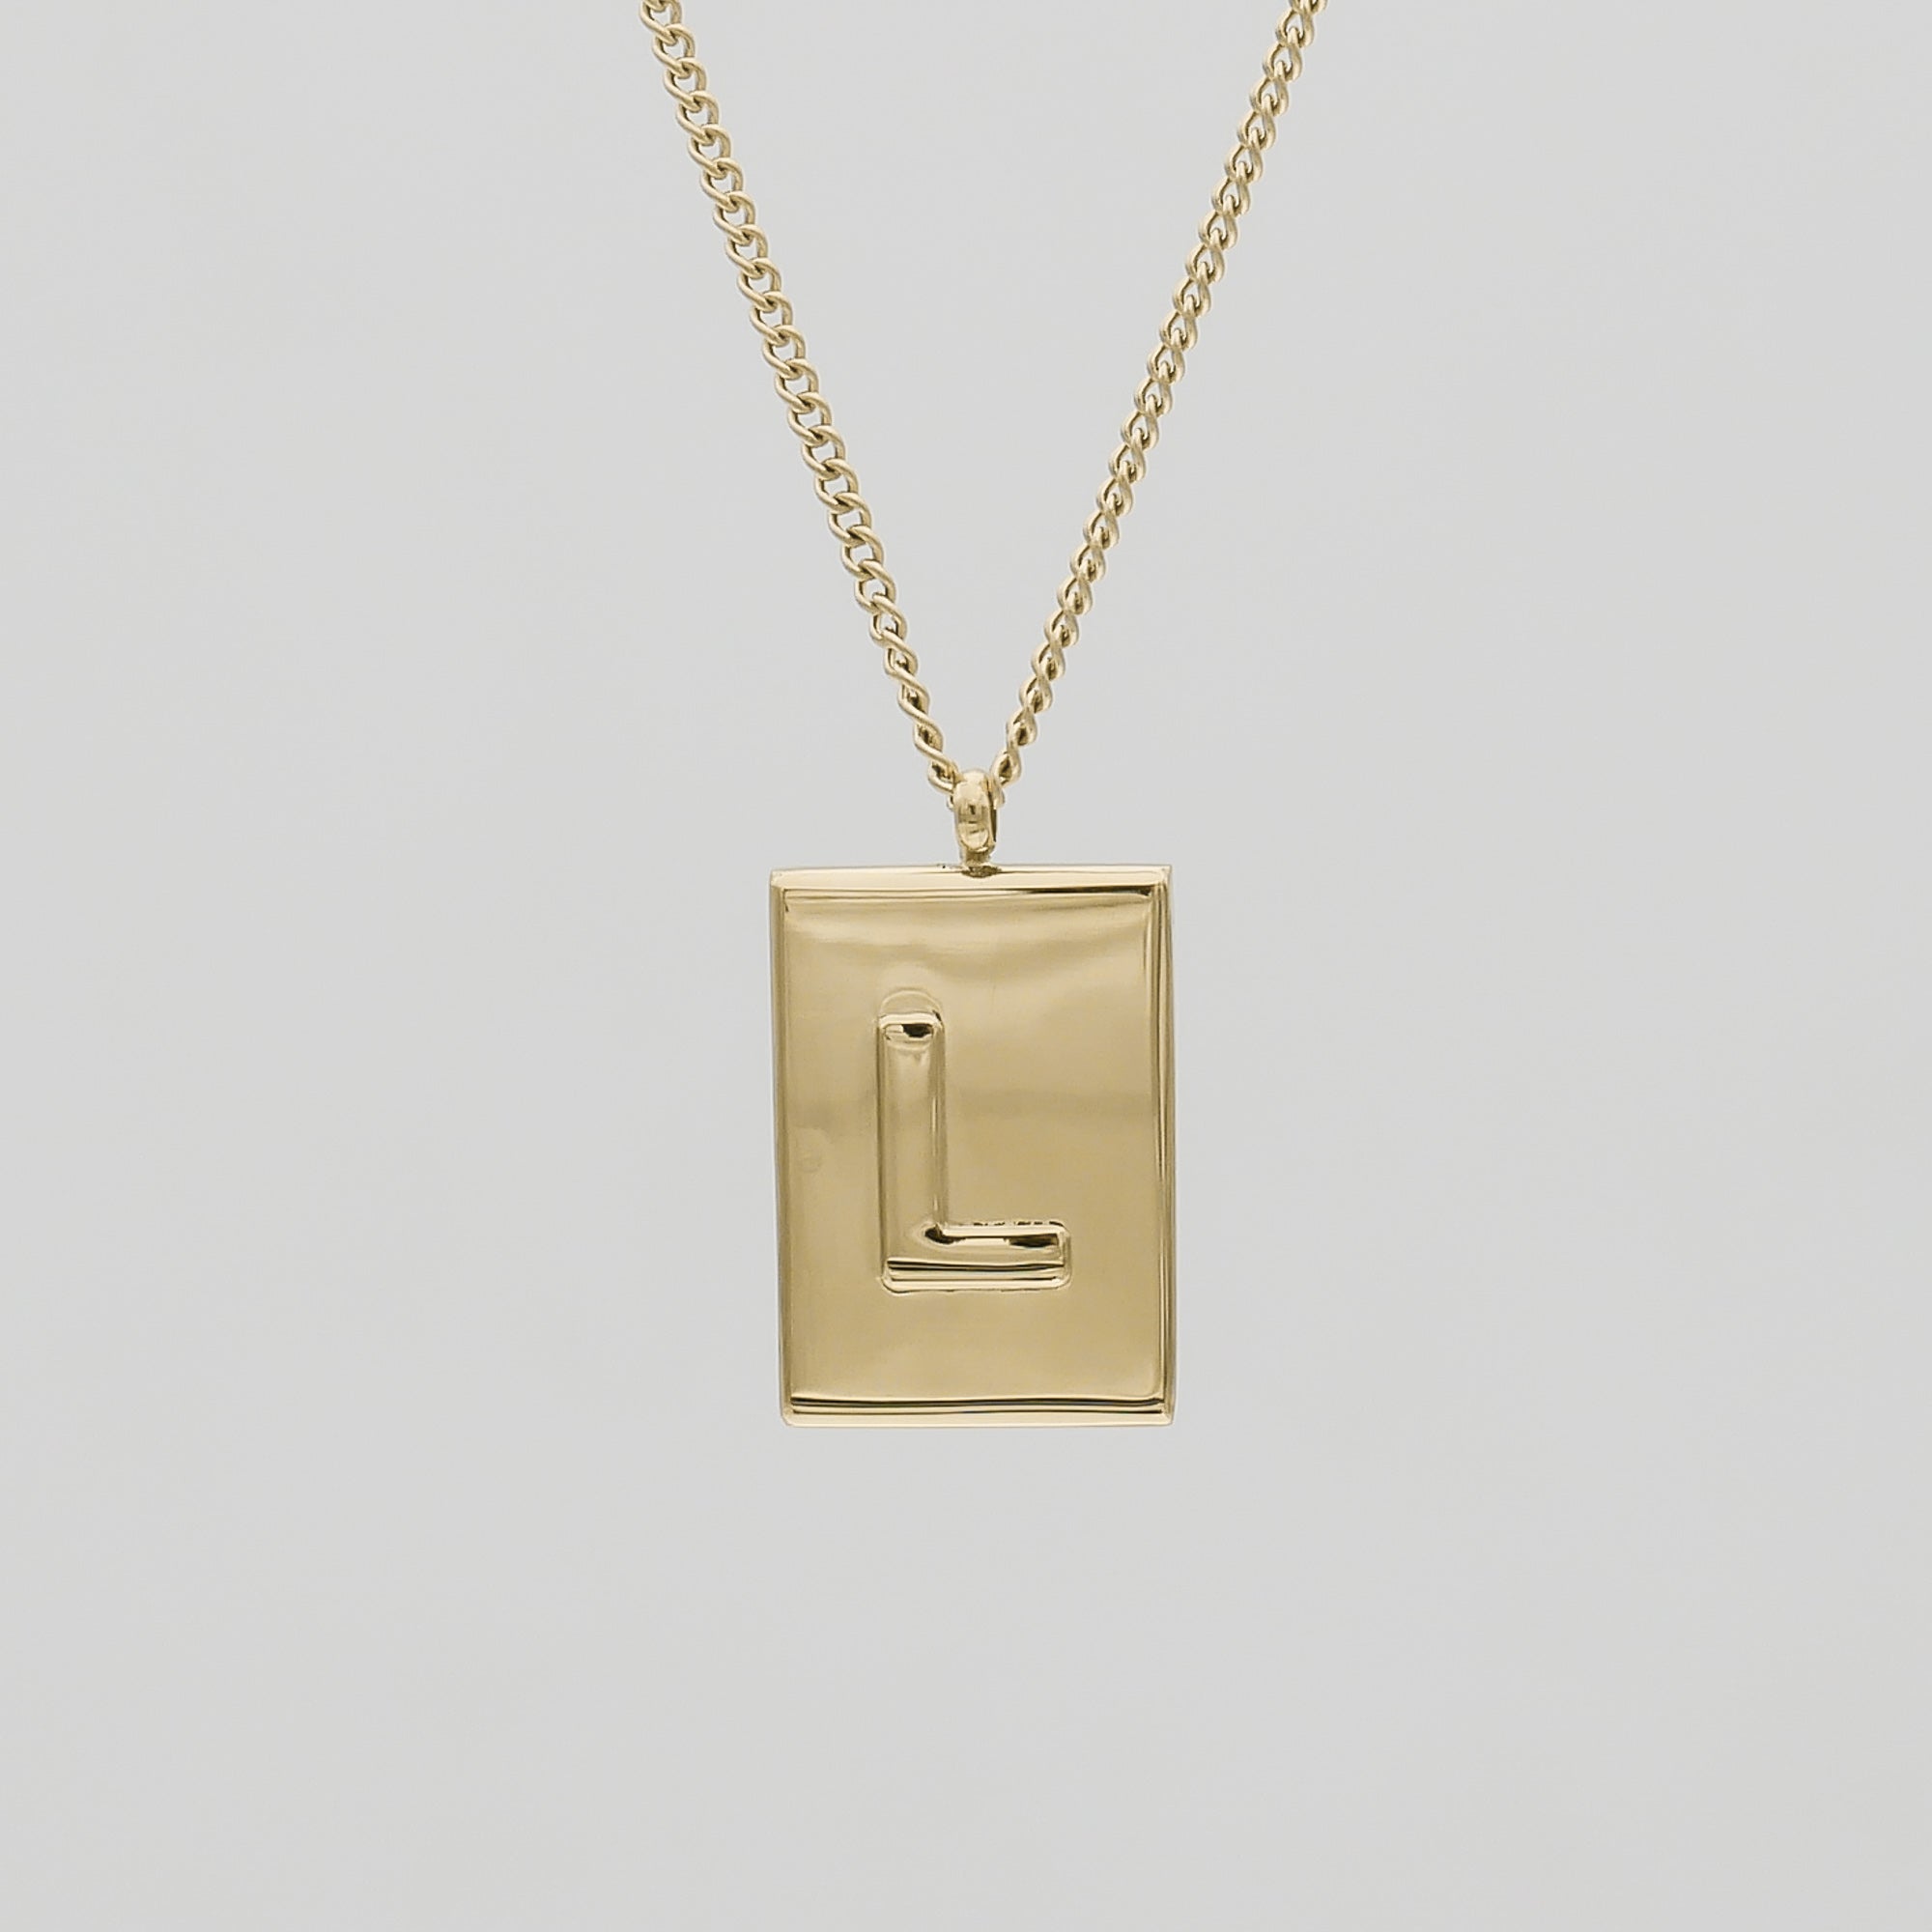 Athena custom initial Gold pendant Necklace, letter L by PRYA